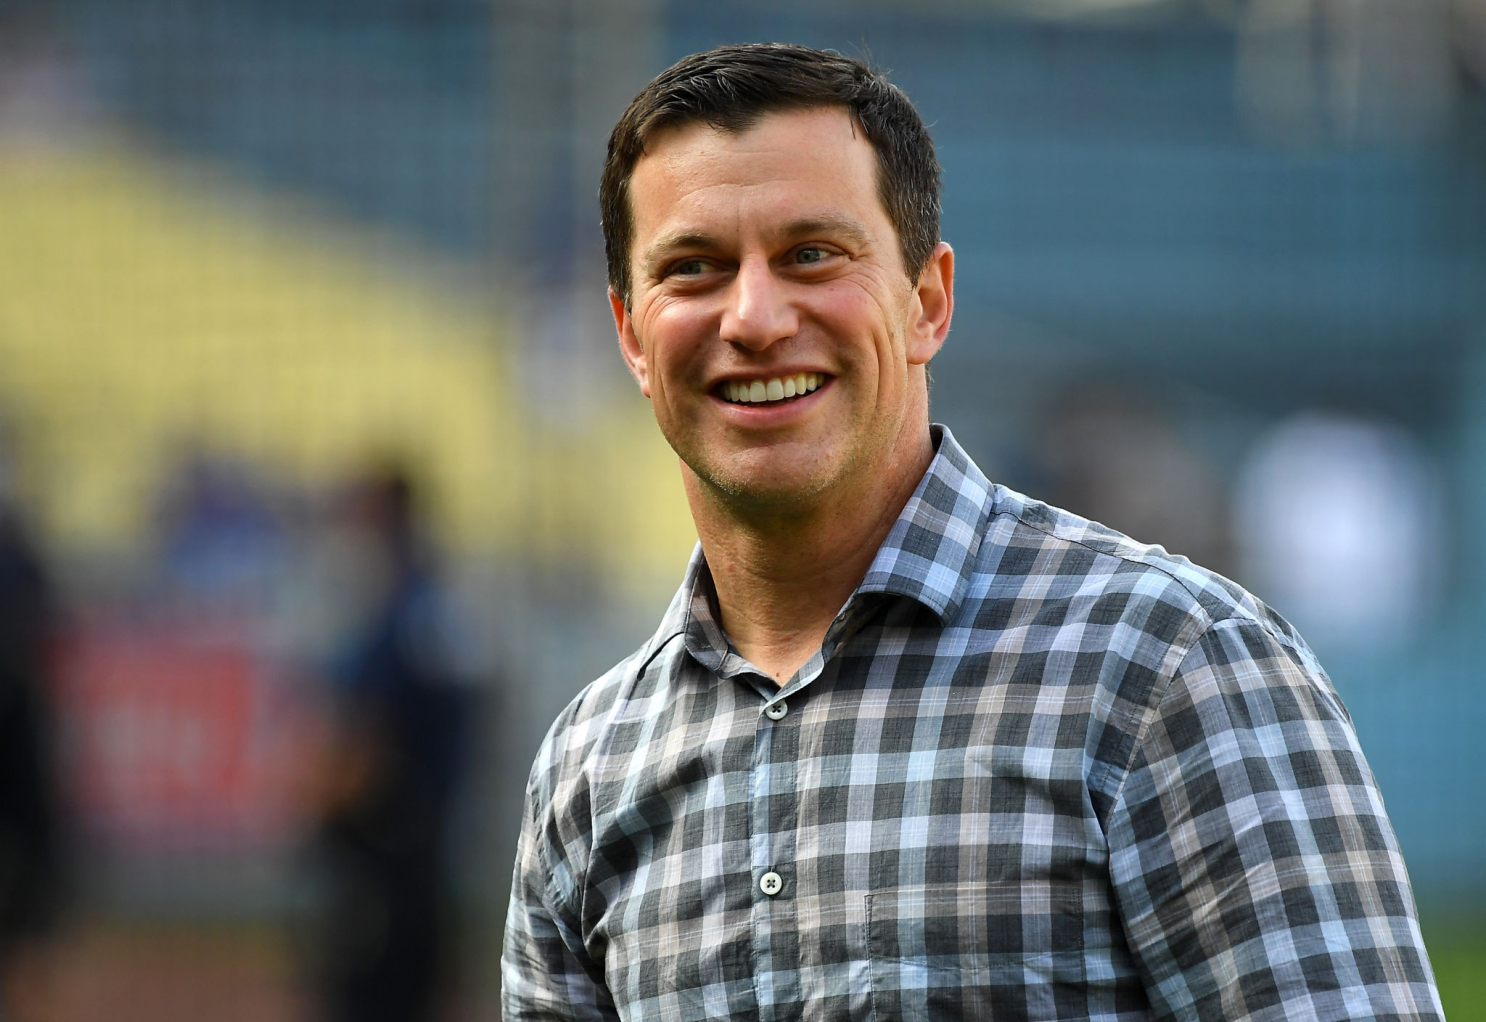 SportTechie Awards: Andrew Friedman Is Our 2020 Executive of the Year